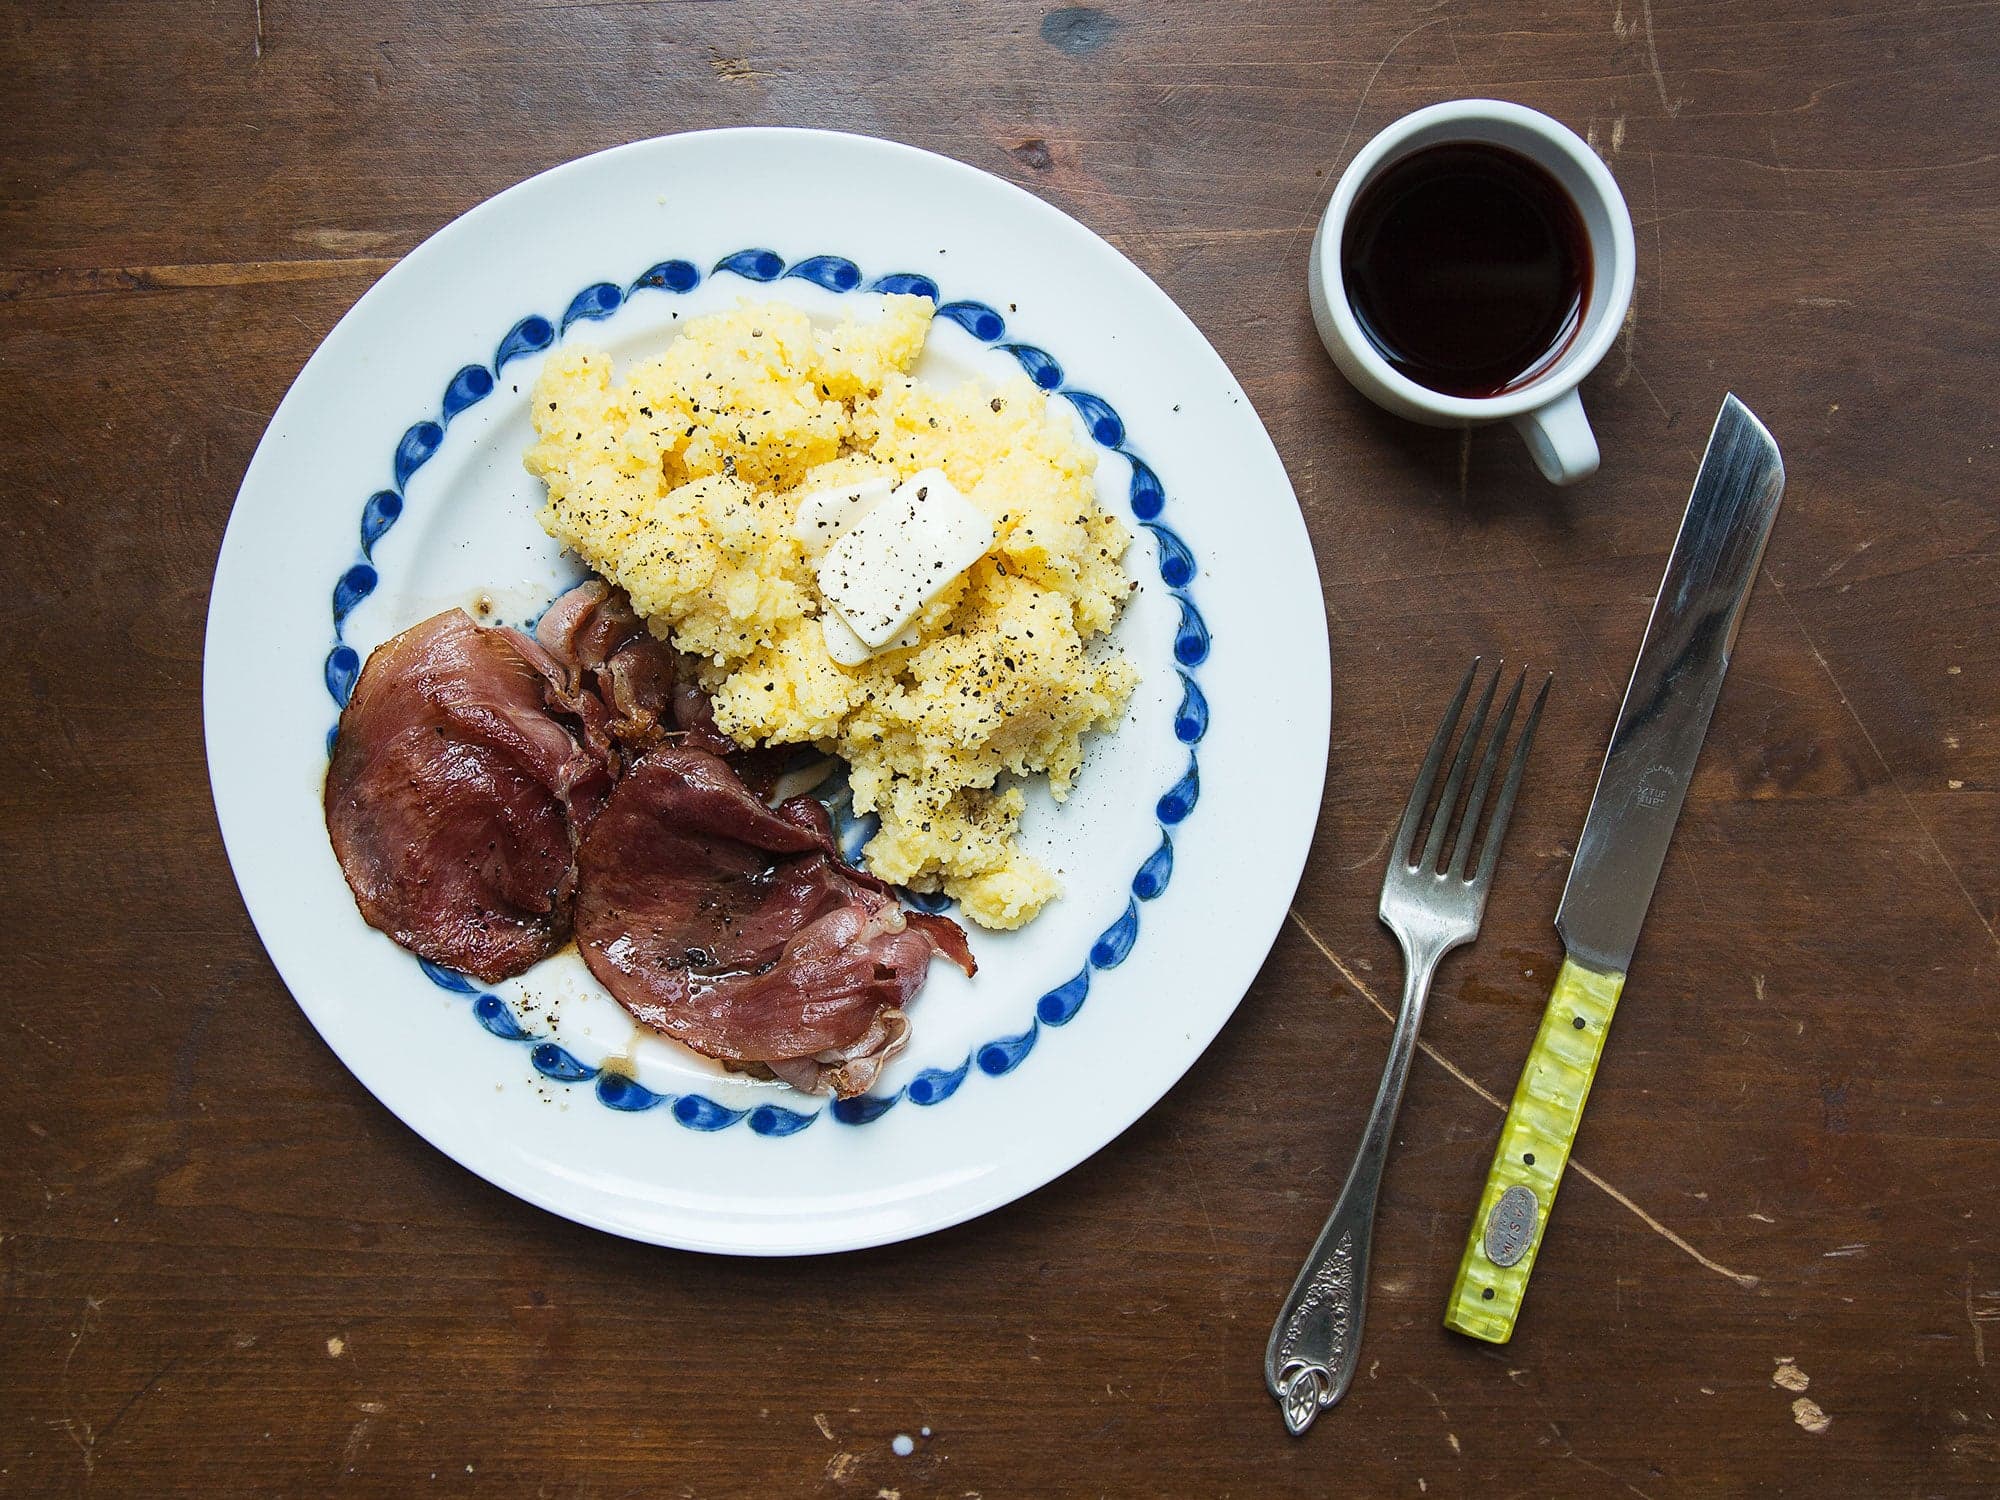 COUNTRY HAM WITH RED-EYE GRAVY AND GRITS